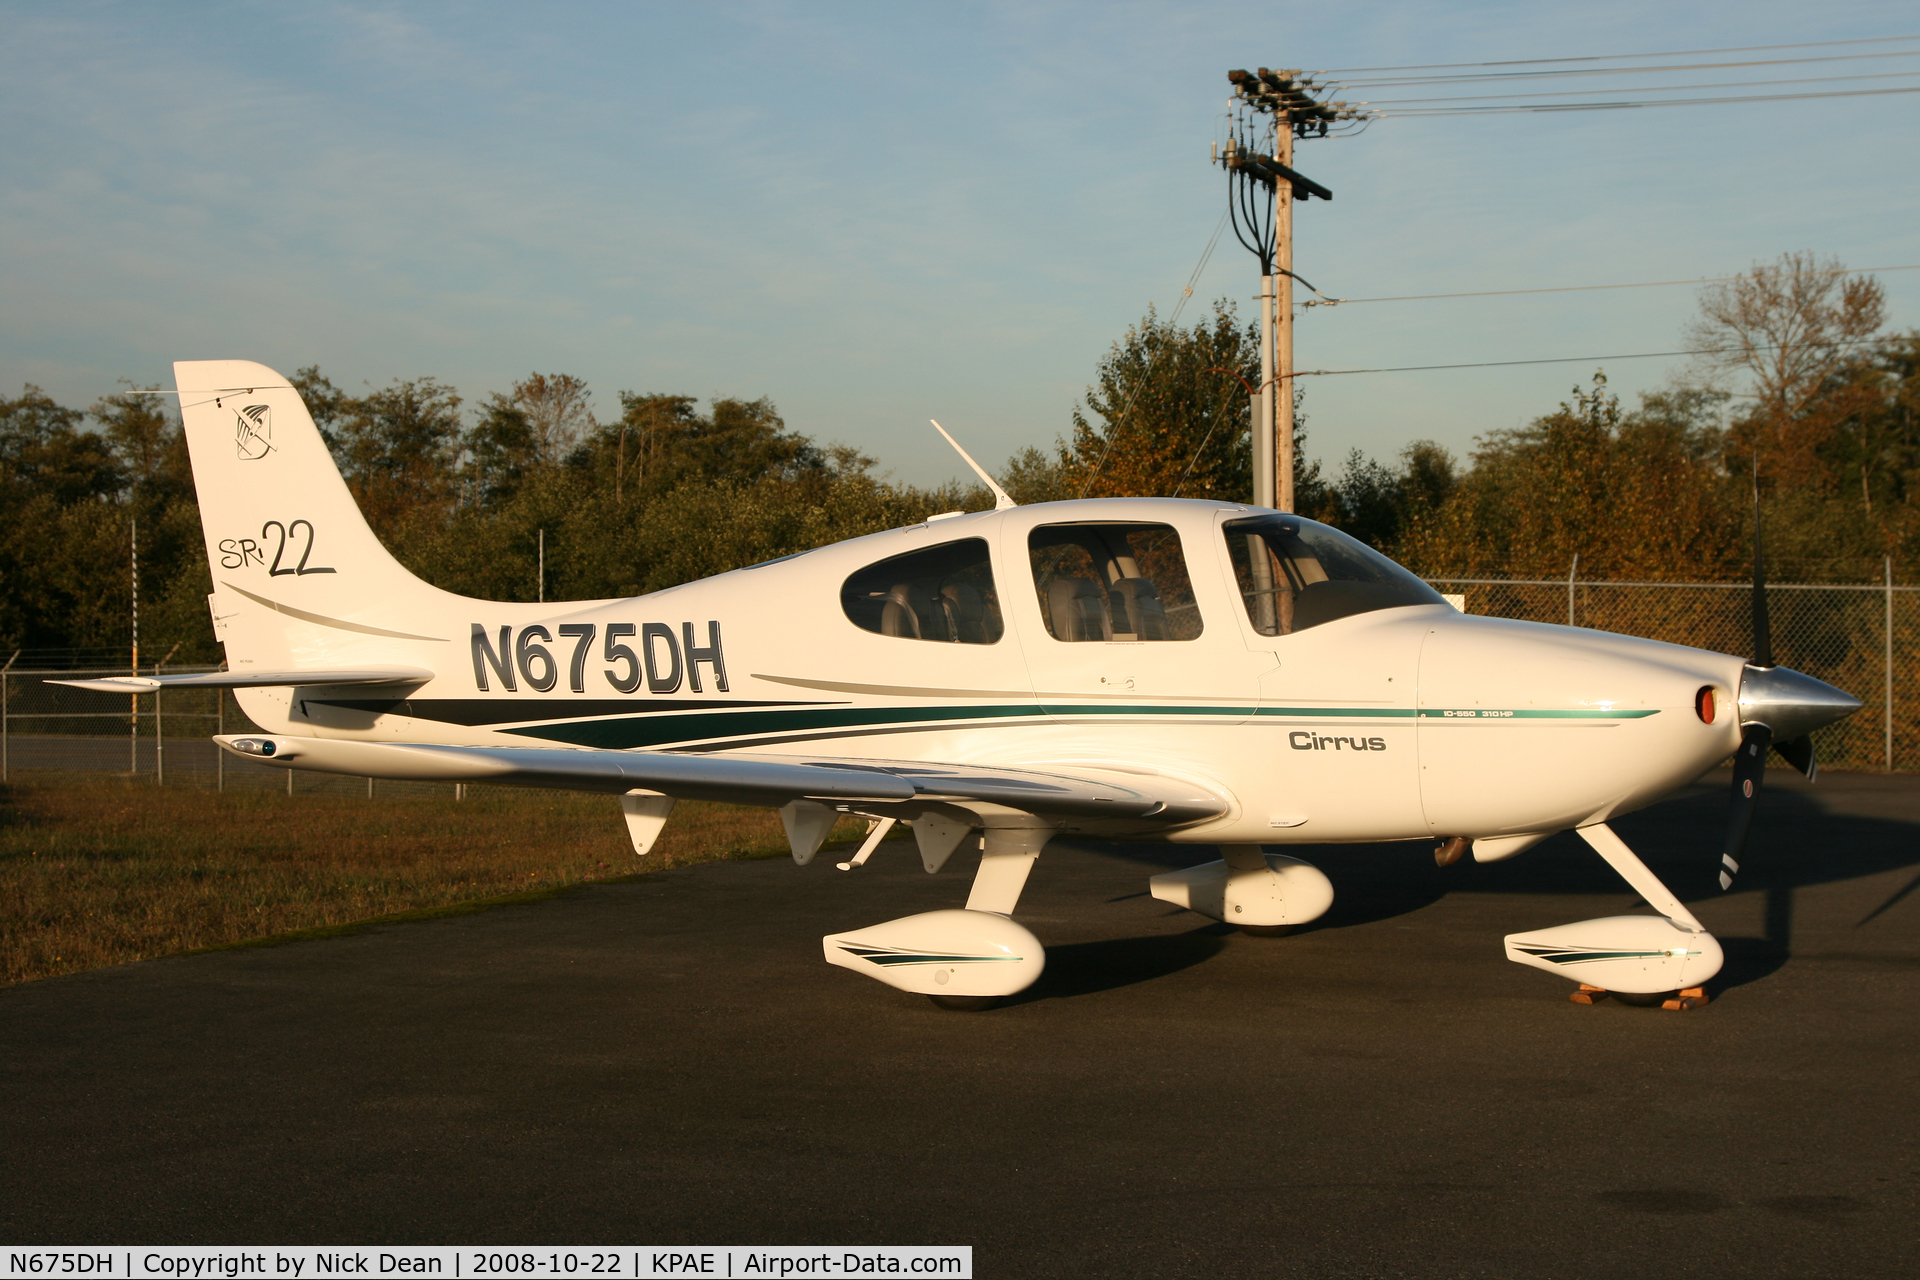 N675DH, 2002 Cirrus SR22 C/N 0163, I like this light level, Canon 24-105L IS